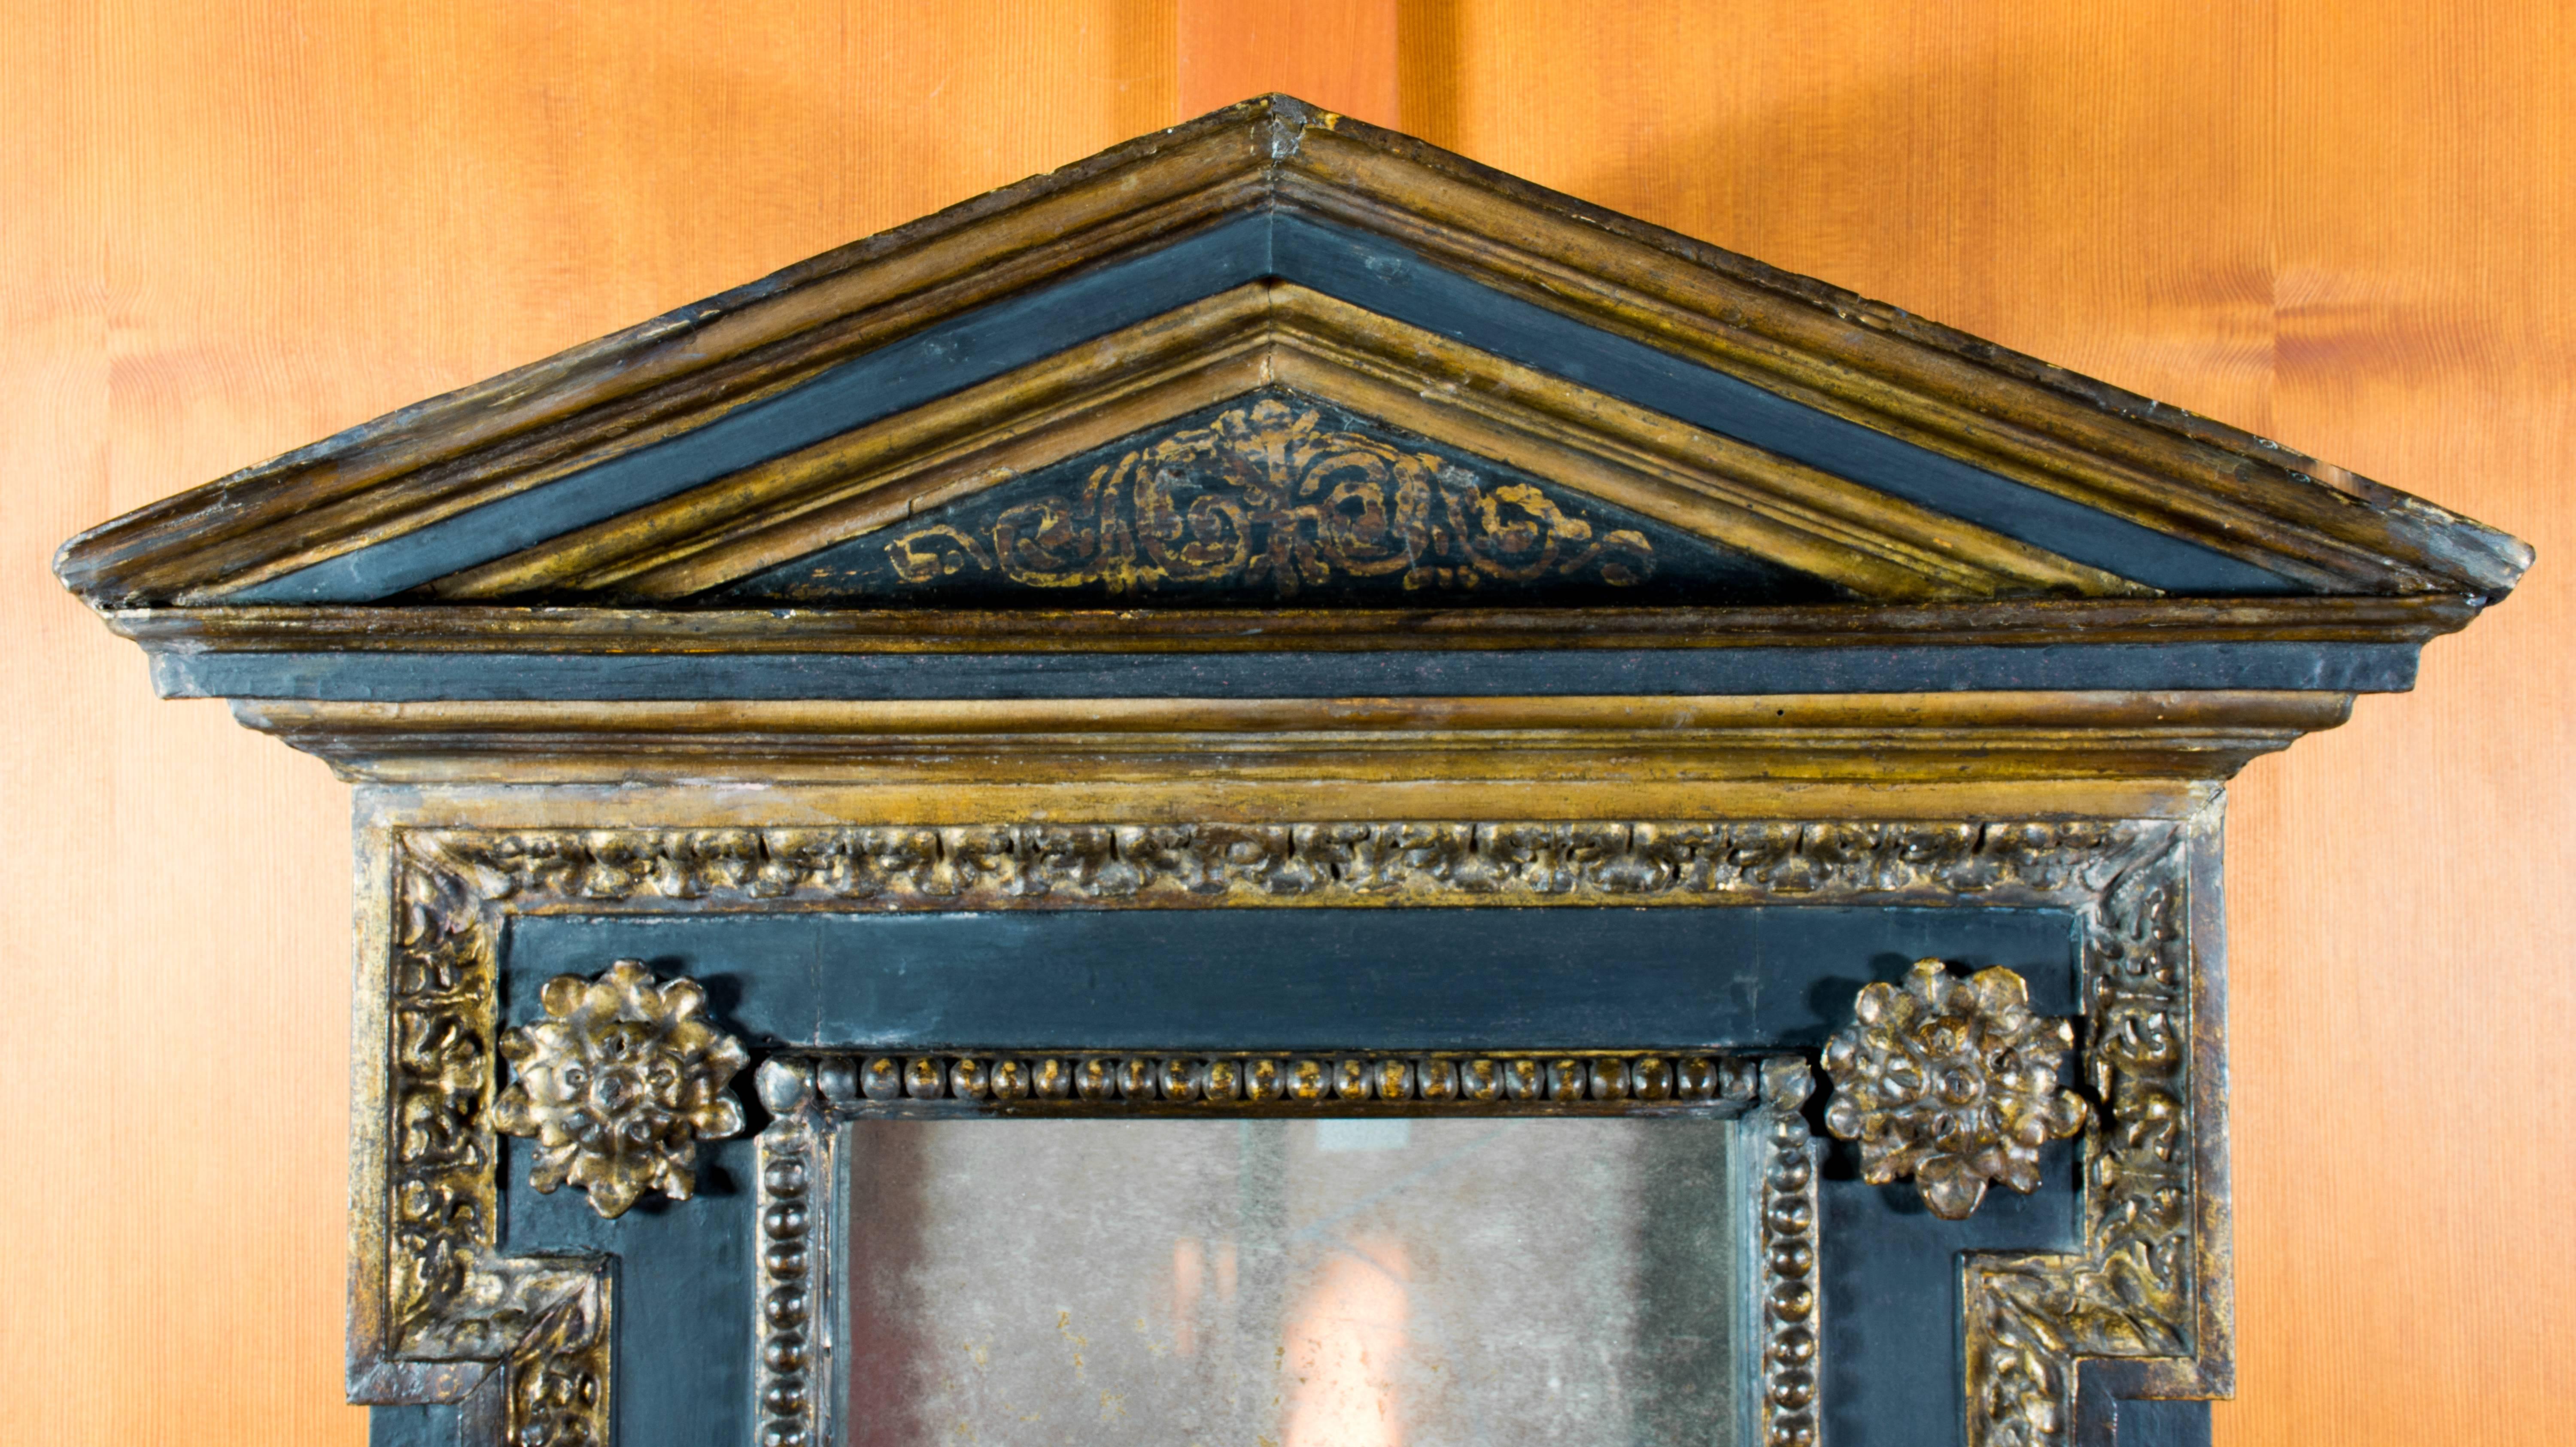 17th Century Mannerist Italian Wood Tabernacle Mirror from the Collection of David Abbato For Sale